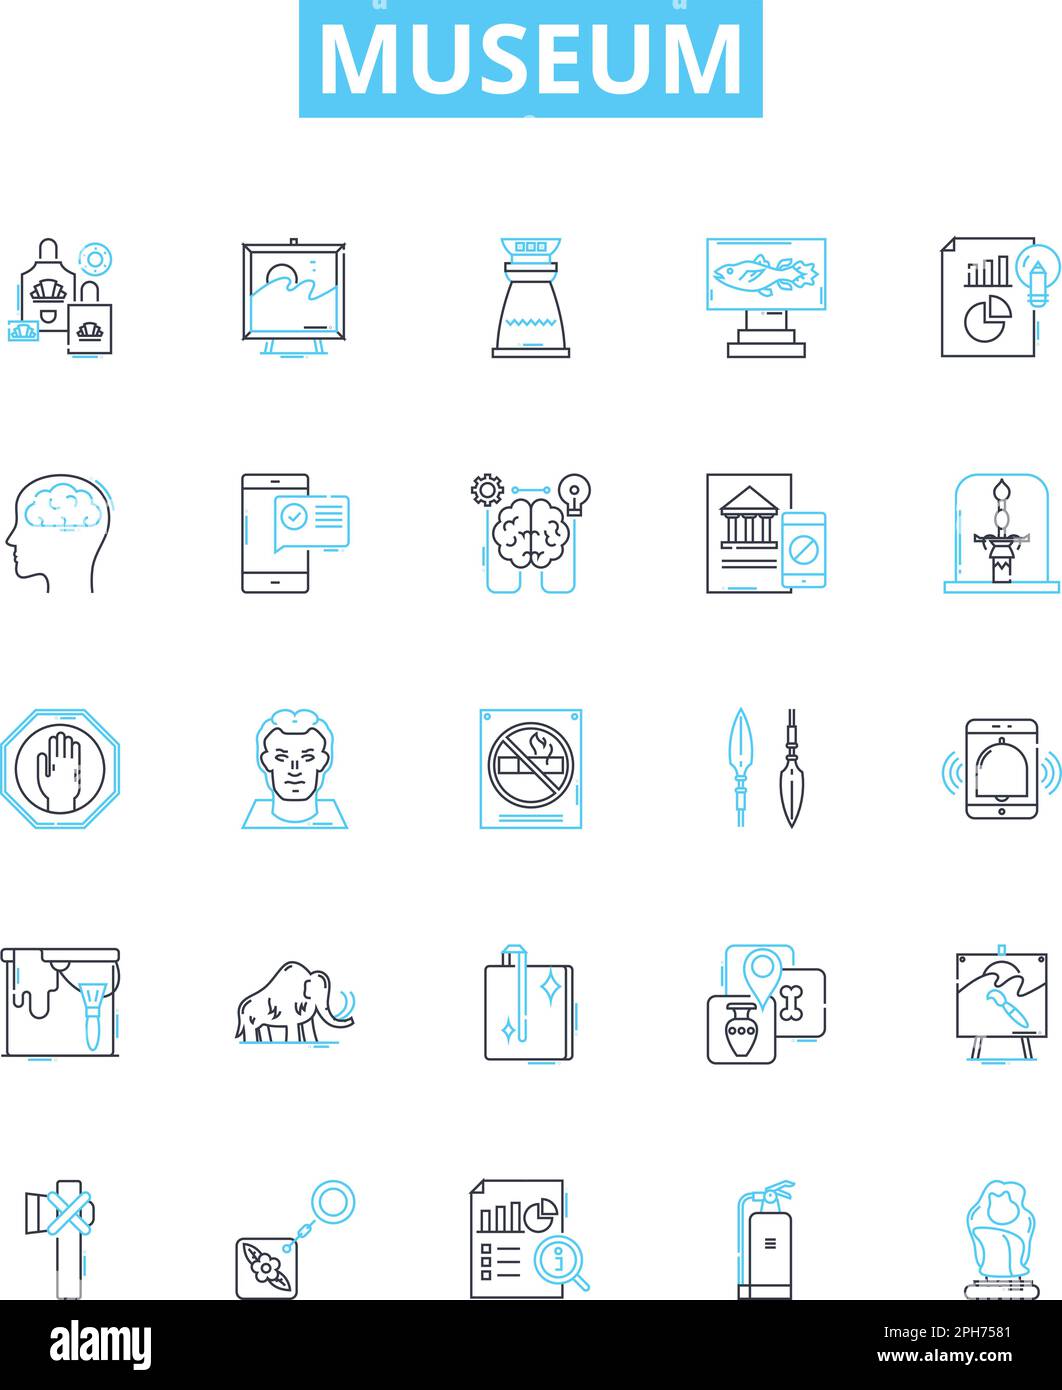 Museum vector line icons set. Museum, Exhibit, Artifact, Collection, Exhibiton, Artwork, Exhibition illustration outline concept symbols and signs Stock Vector